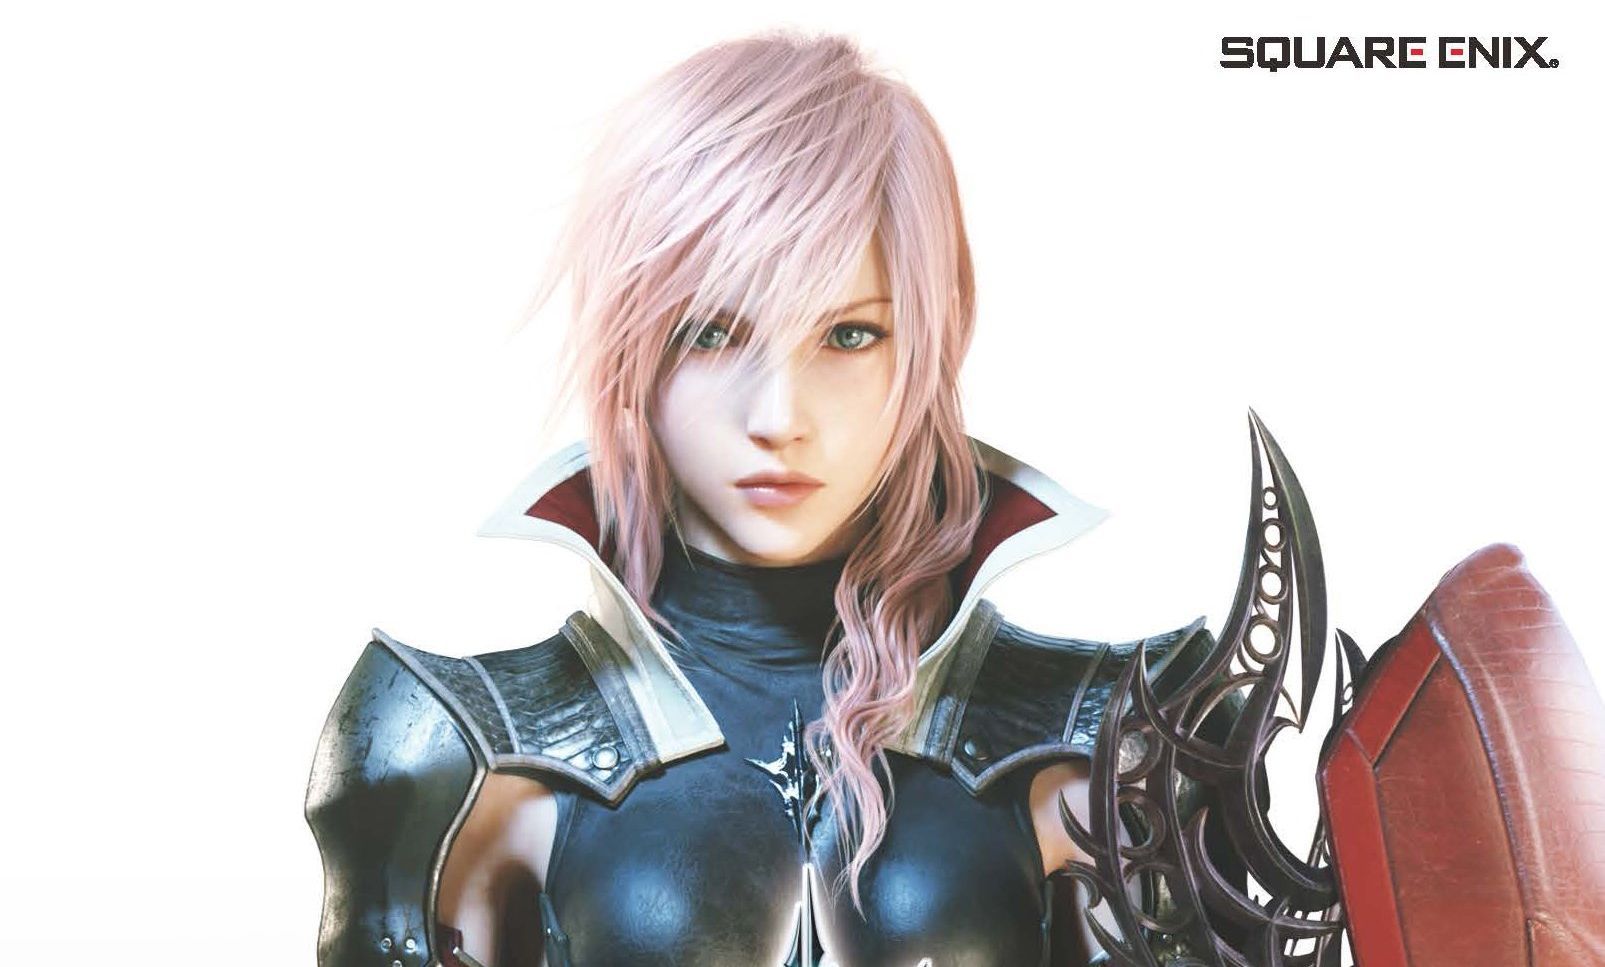 LIGHTNING BECOMES A FASHION ICON IN LOUIS VUITTON'S “SERIES 4” CAMPAIGN -  Square Enix North America Press Hub